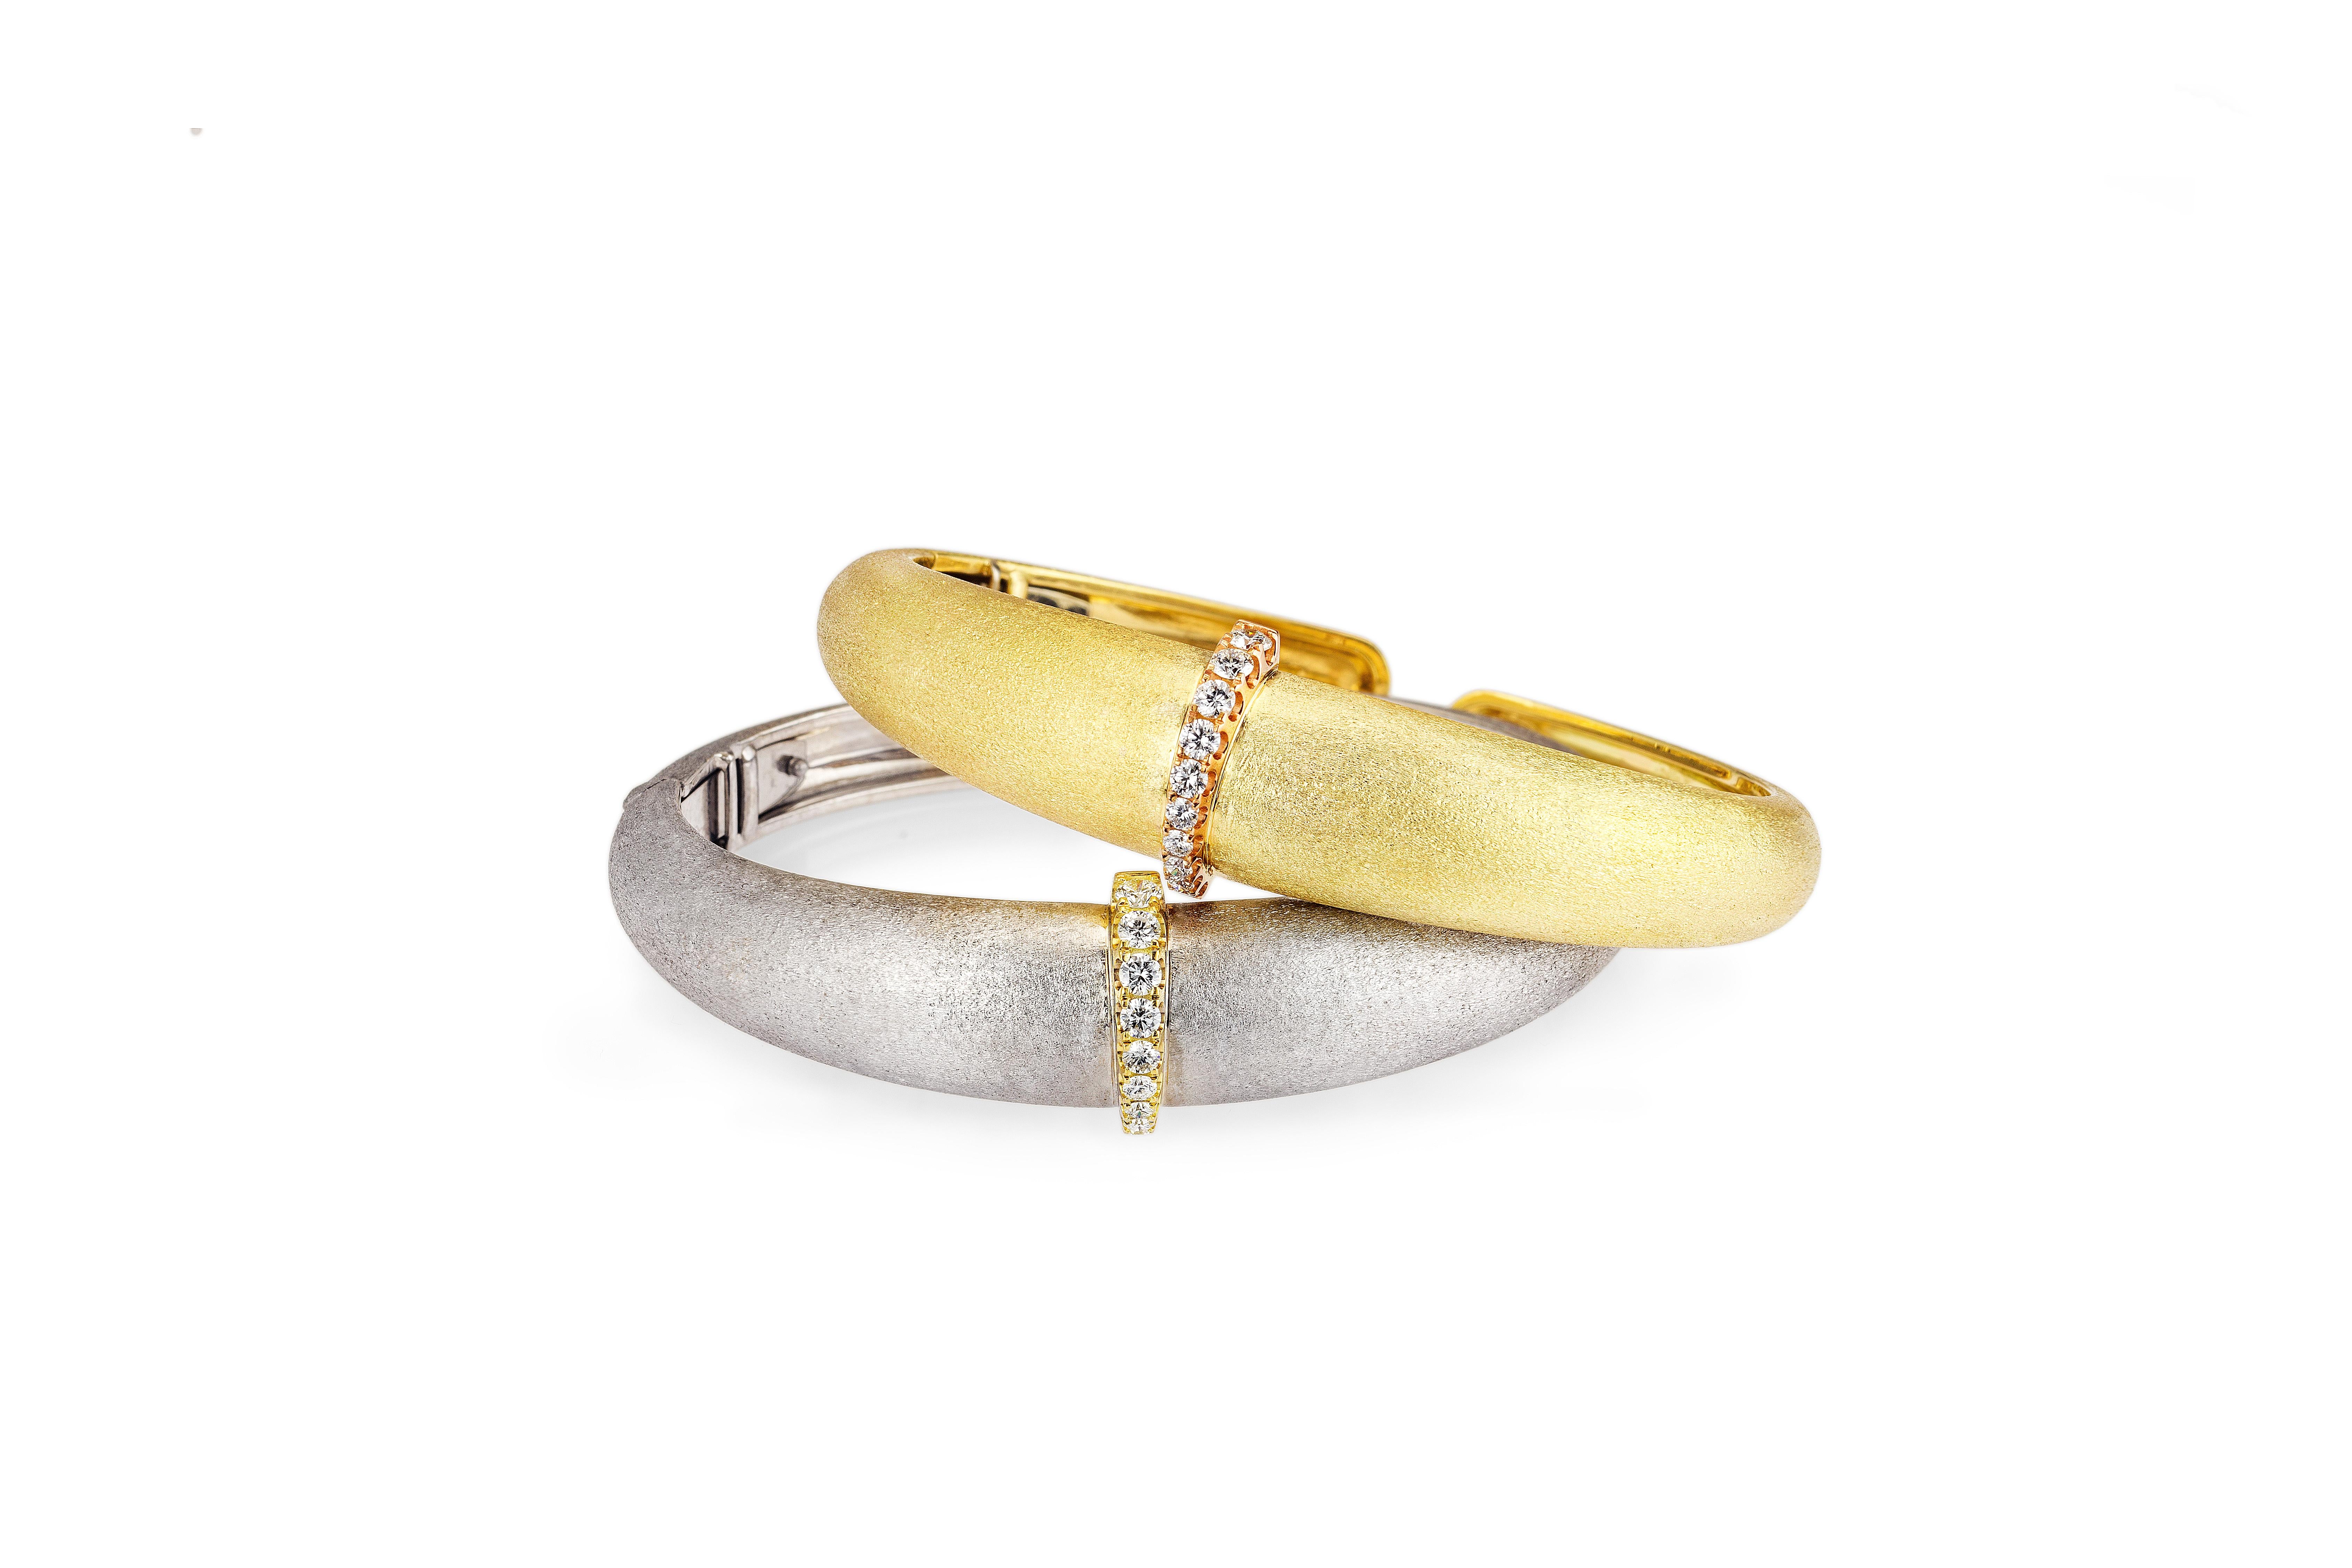 A statement piece in 18k yellow gold with a stone etched finish to resemble raw silk.  A yellow gold and white diamond ridge adds an architectural element to the sensual shape. This talisman cuff is inspired by a ring AnaKatarina designed for